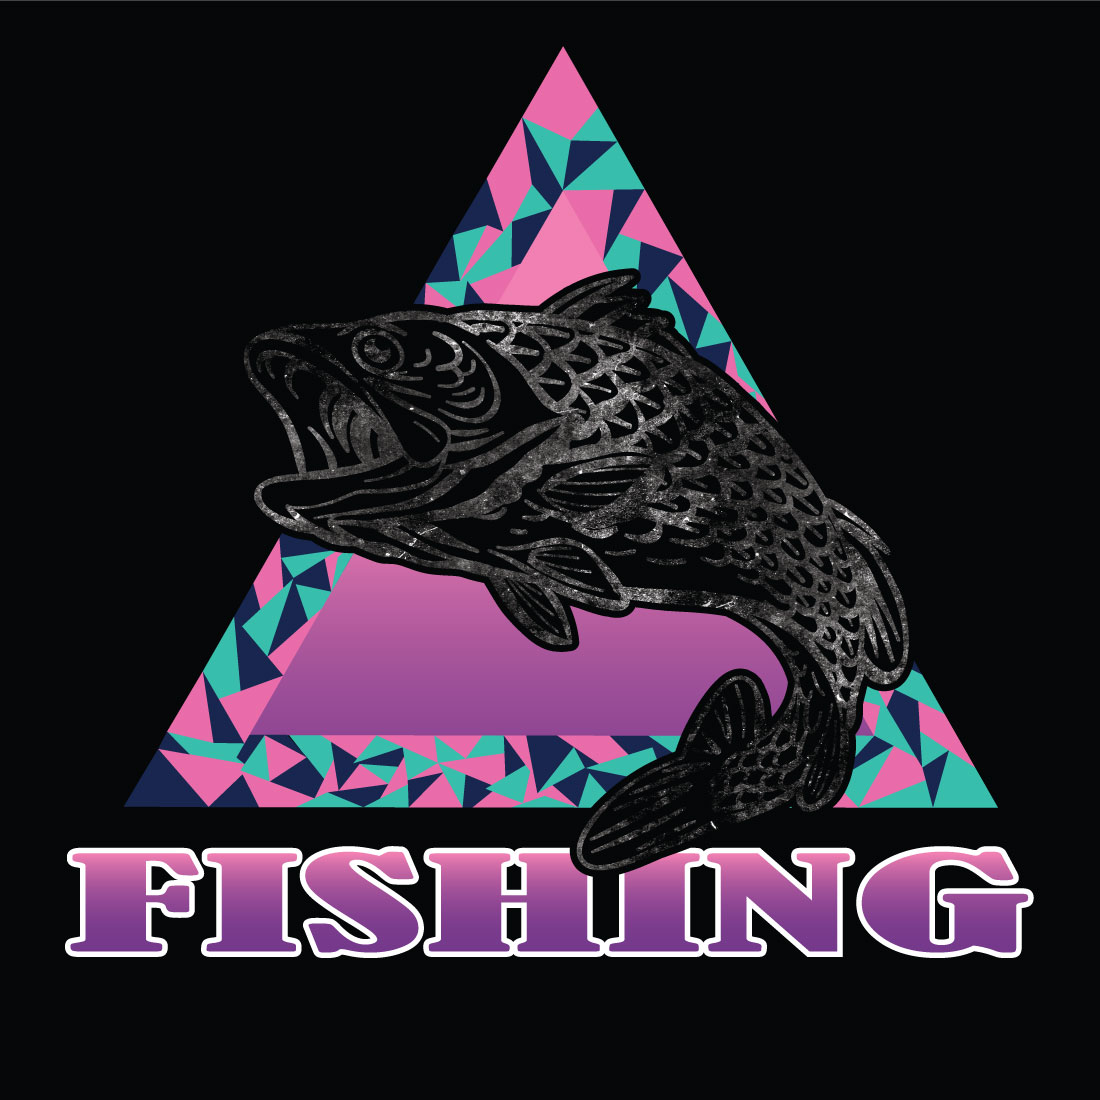 FISHING gradient color T-shirt design cover image.